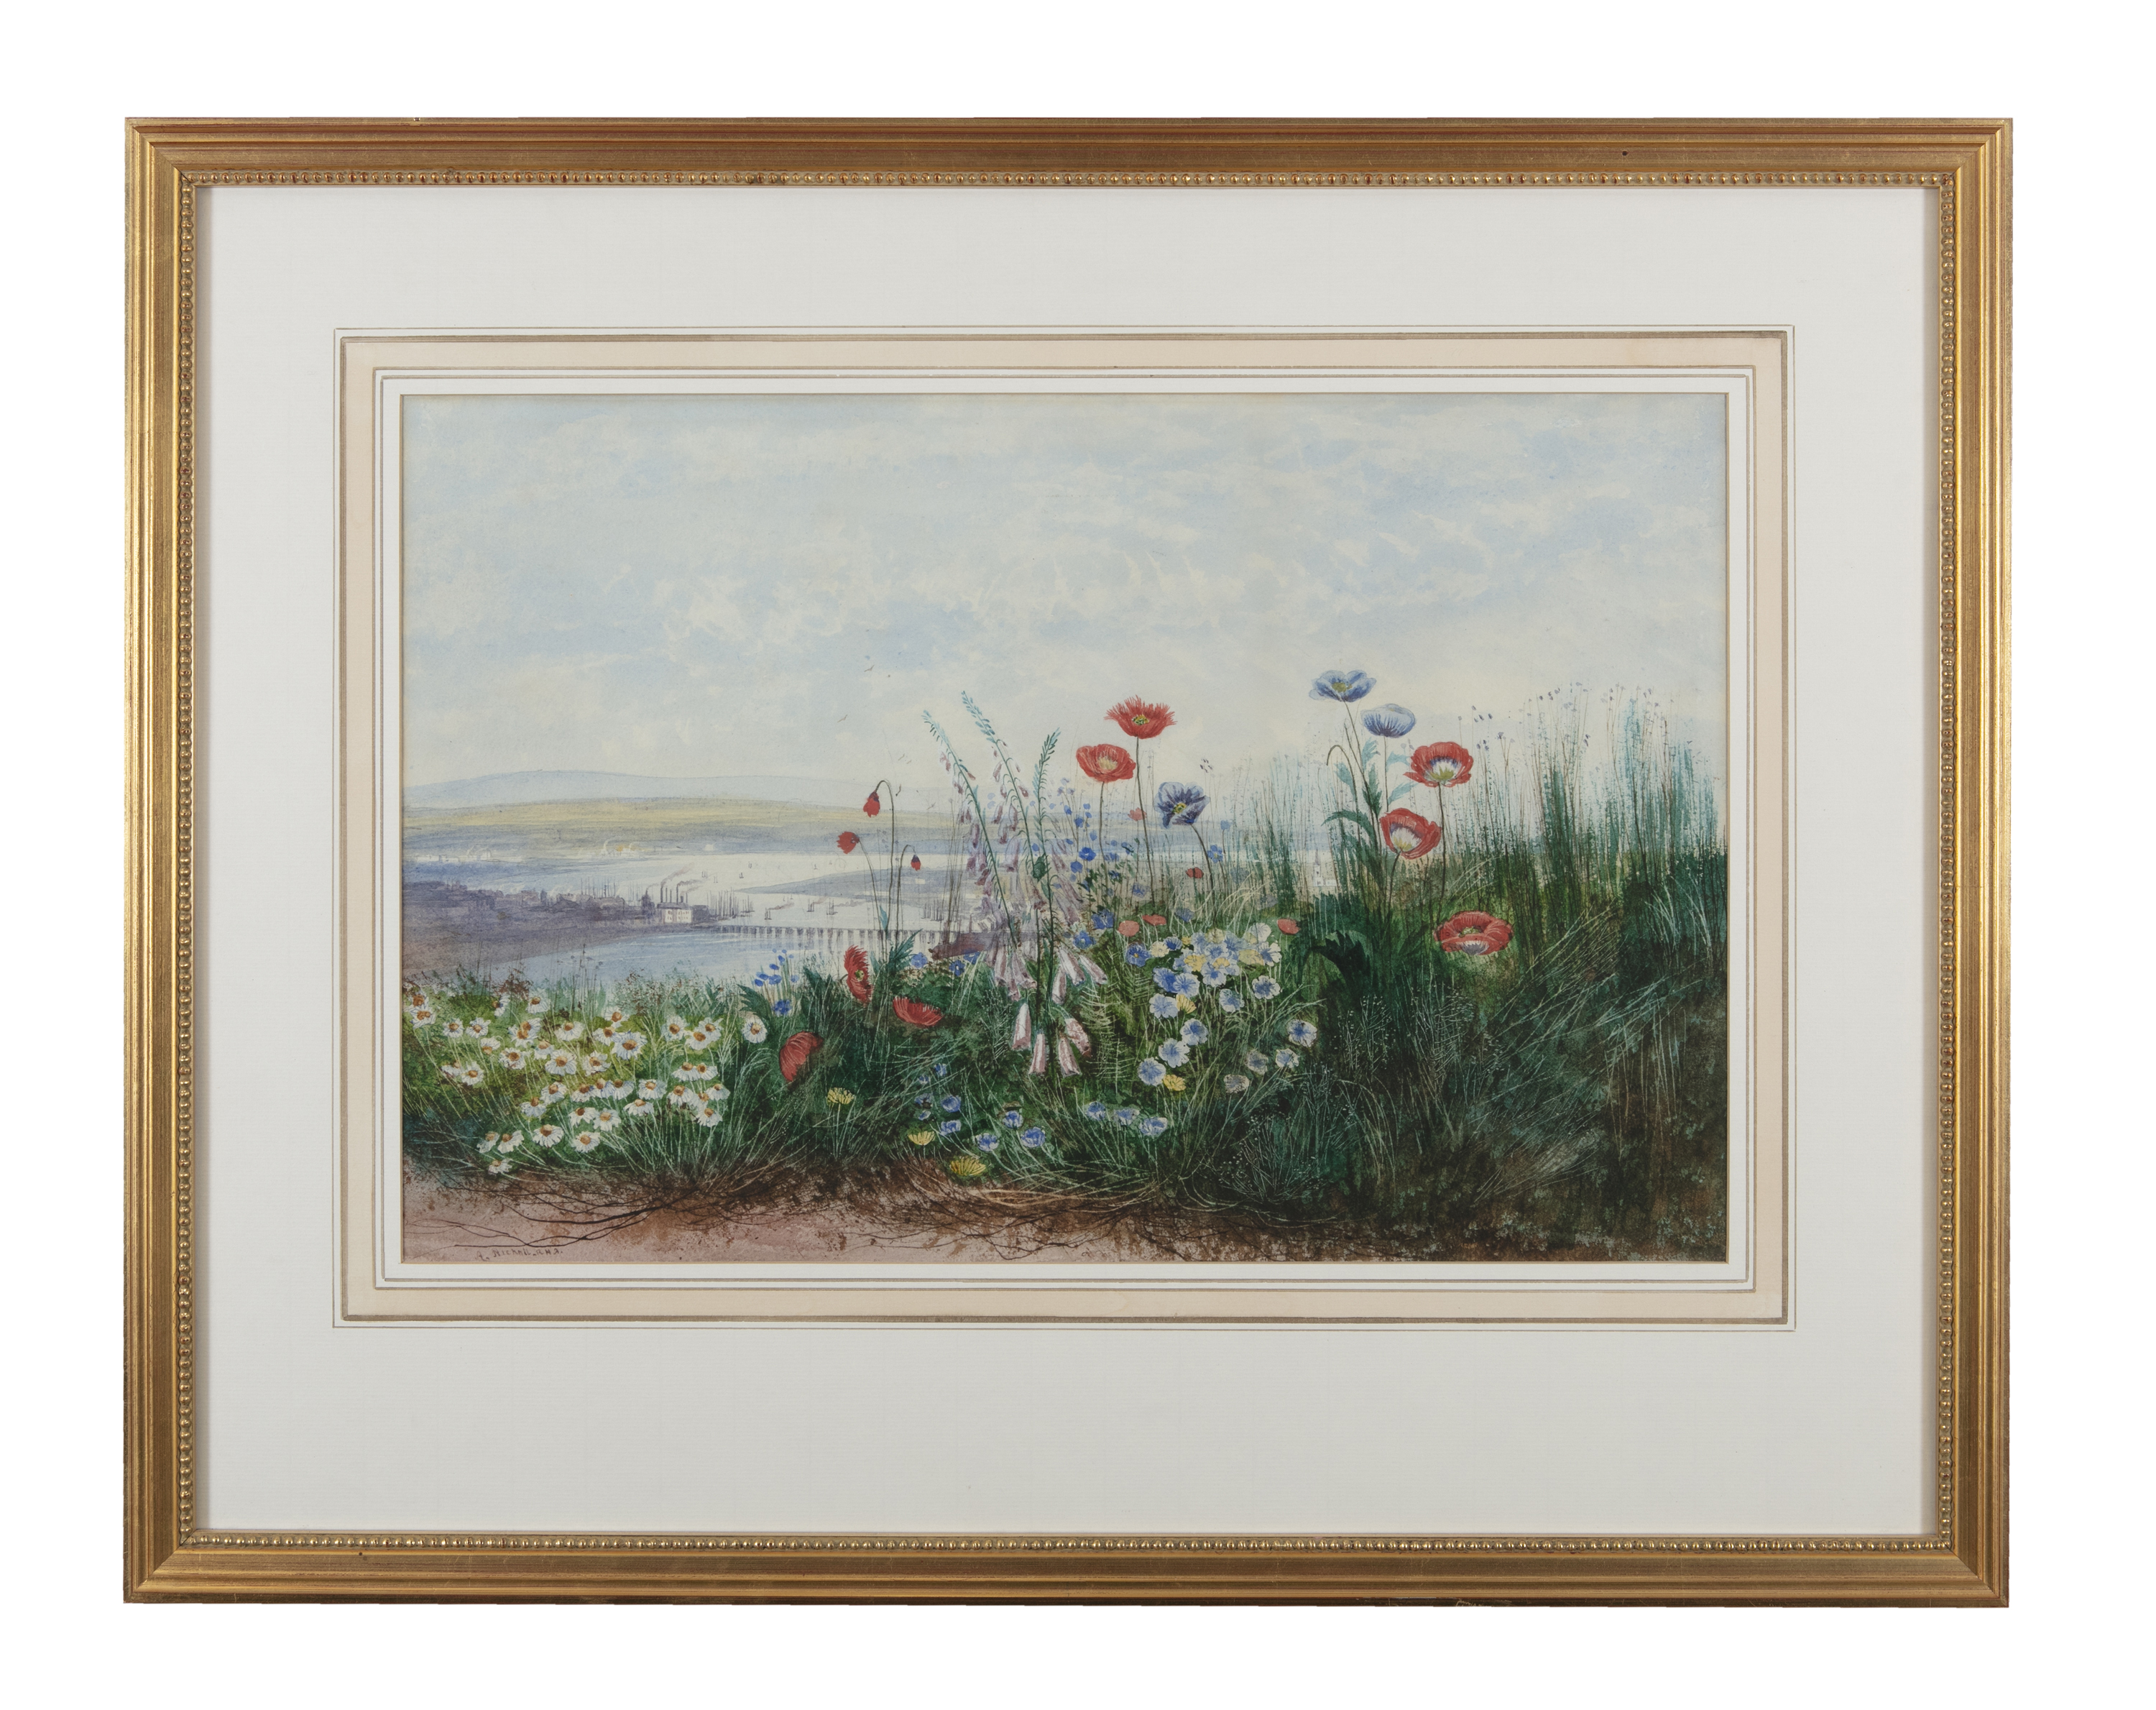 Andrew Nicholl RHA (1804-1886) A View of Derry through a Bank of Wildflowers Watercolour, 34 x - Image 2 of 2